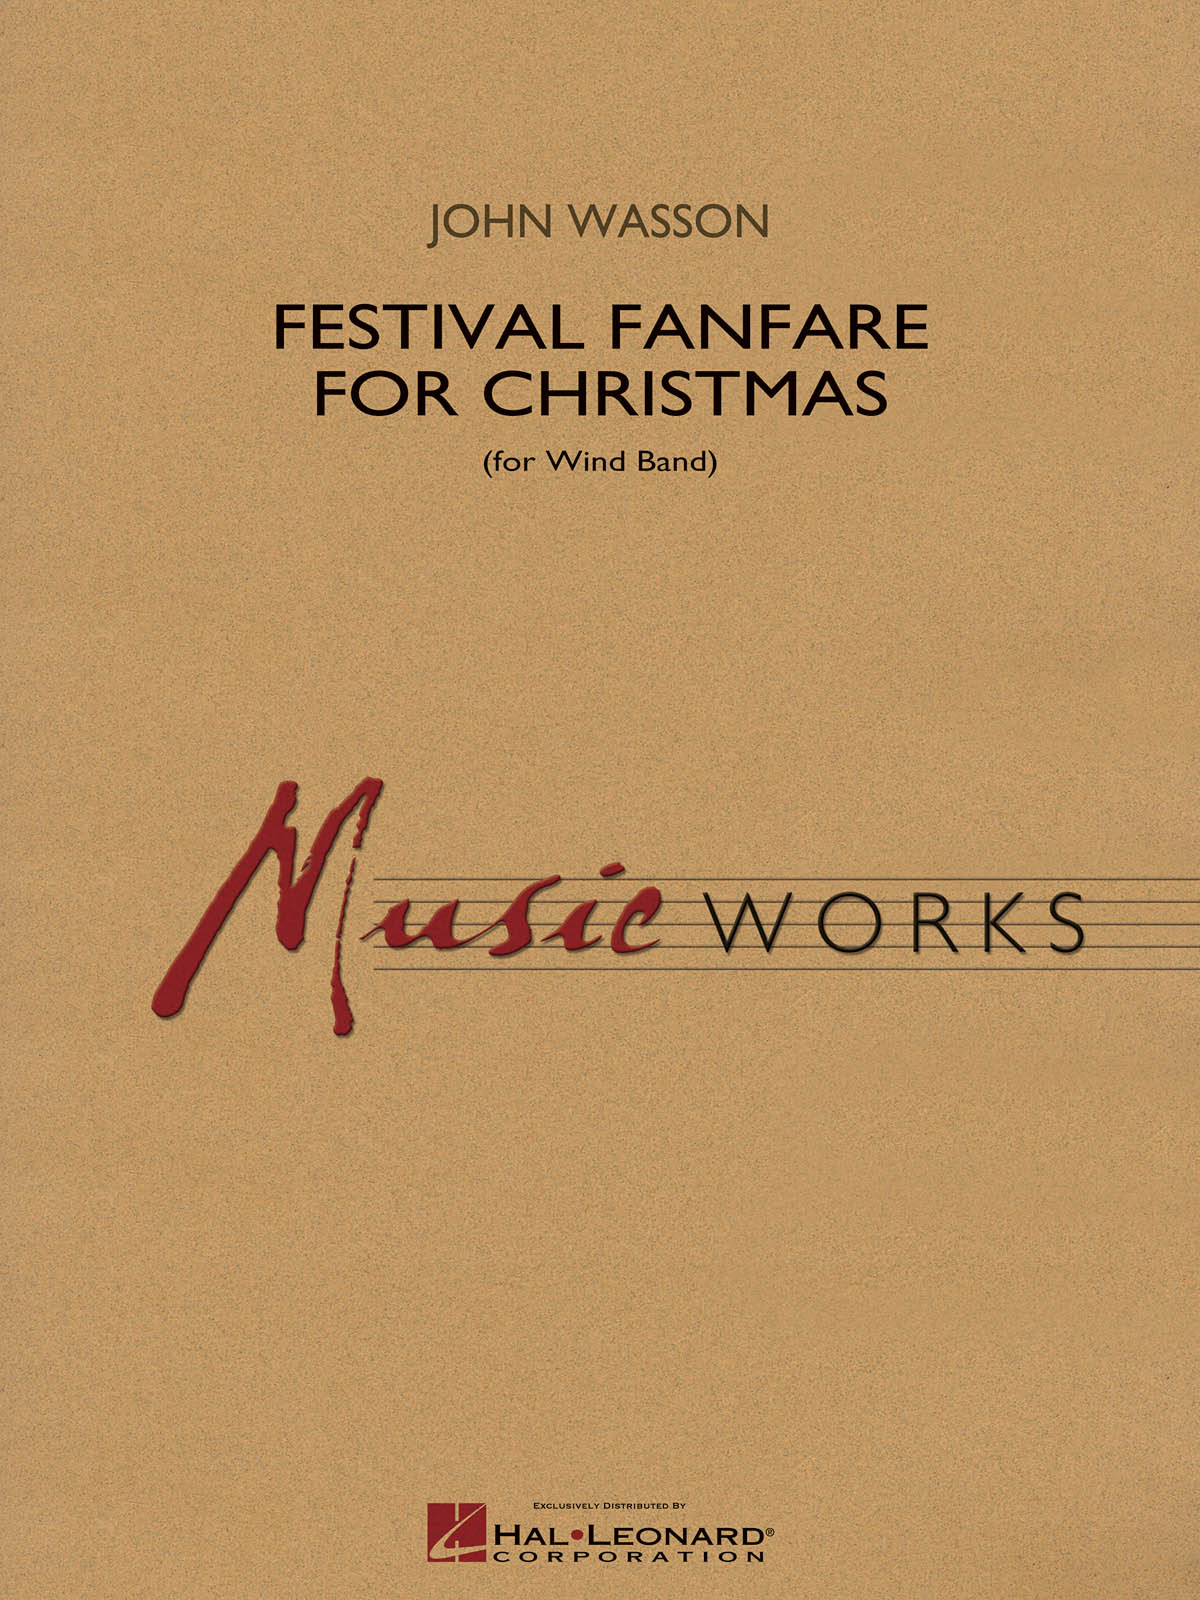 John Wasson: Festival Fanfare for Christmas (for Wind Band): Concert Band: Score